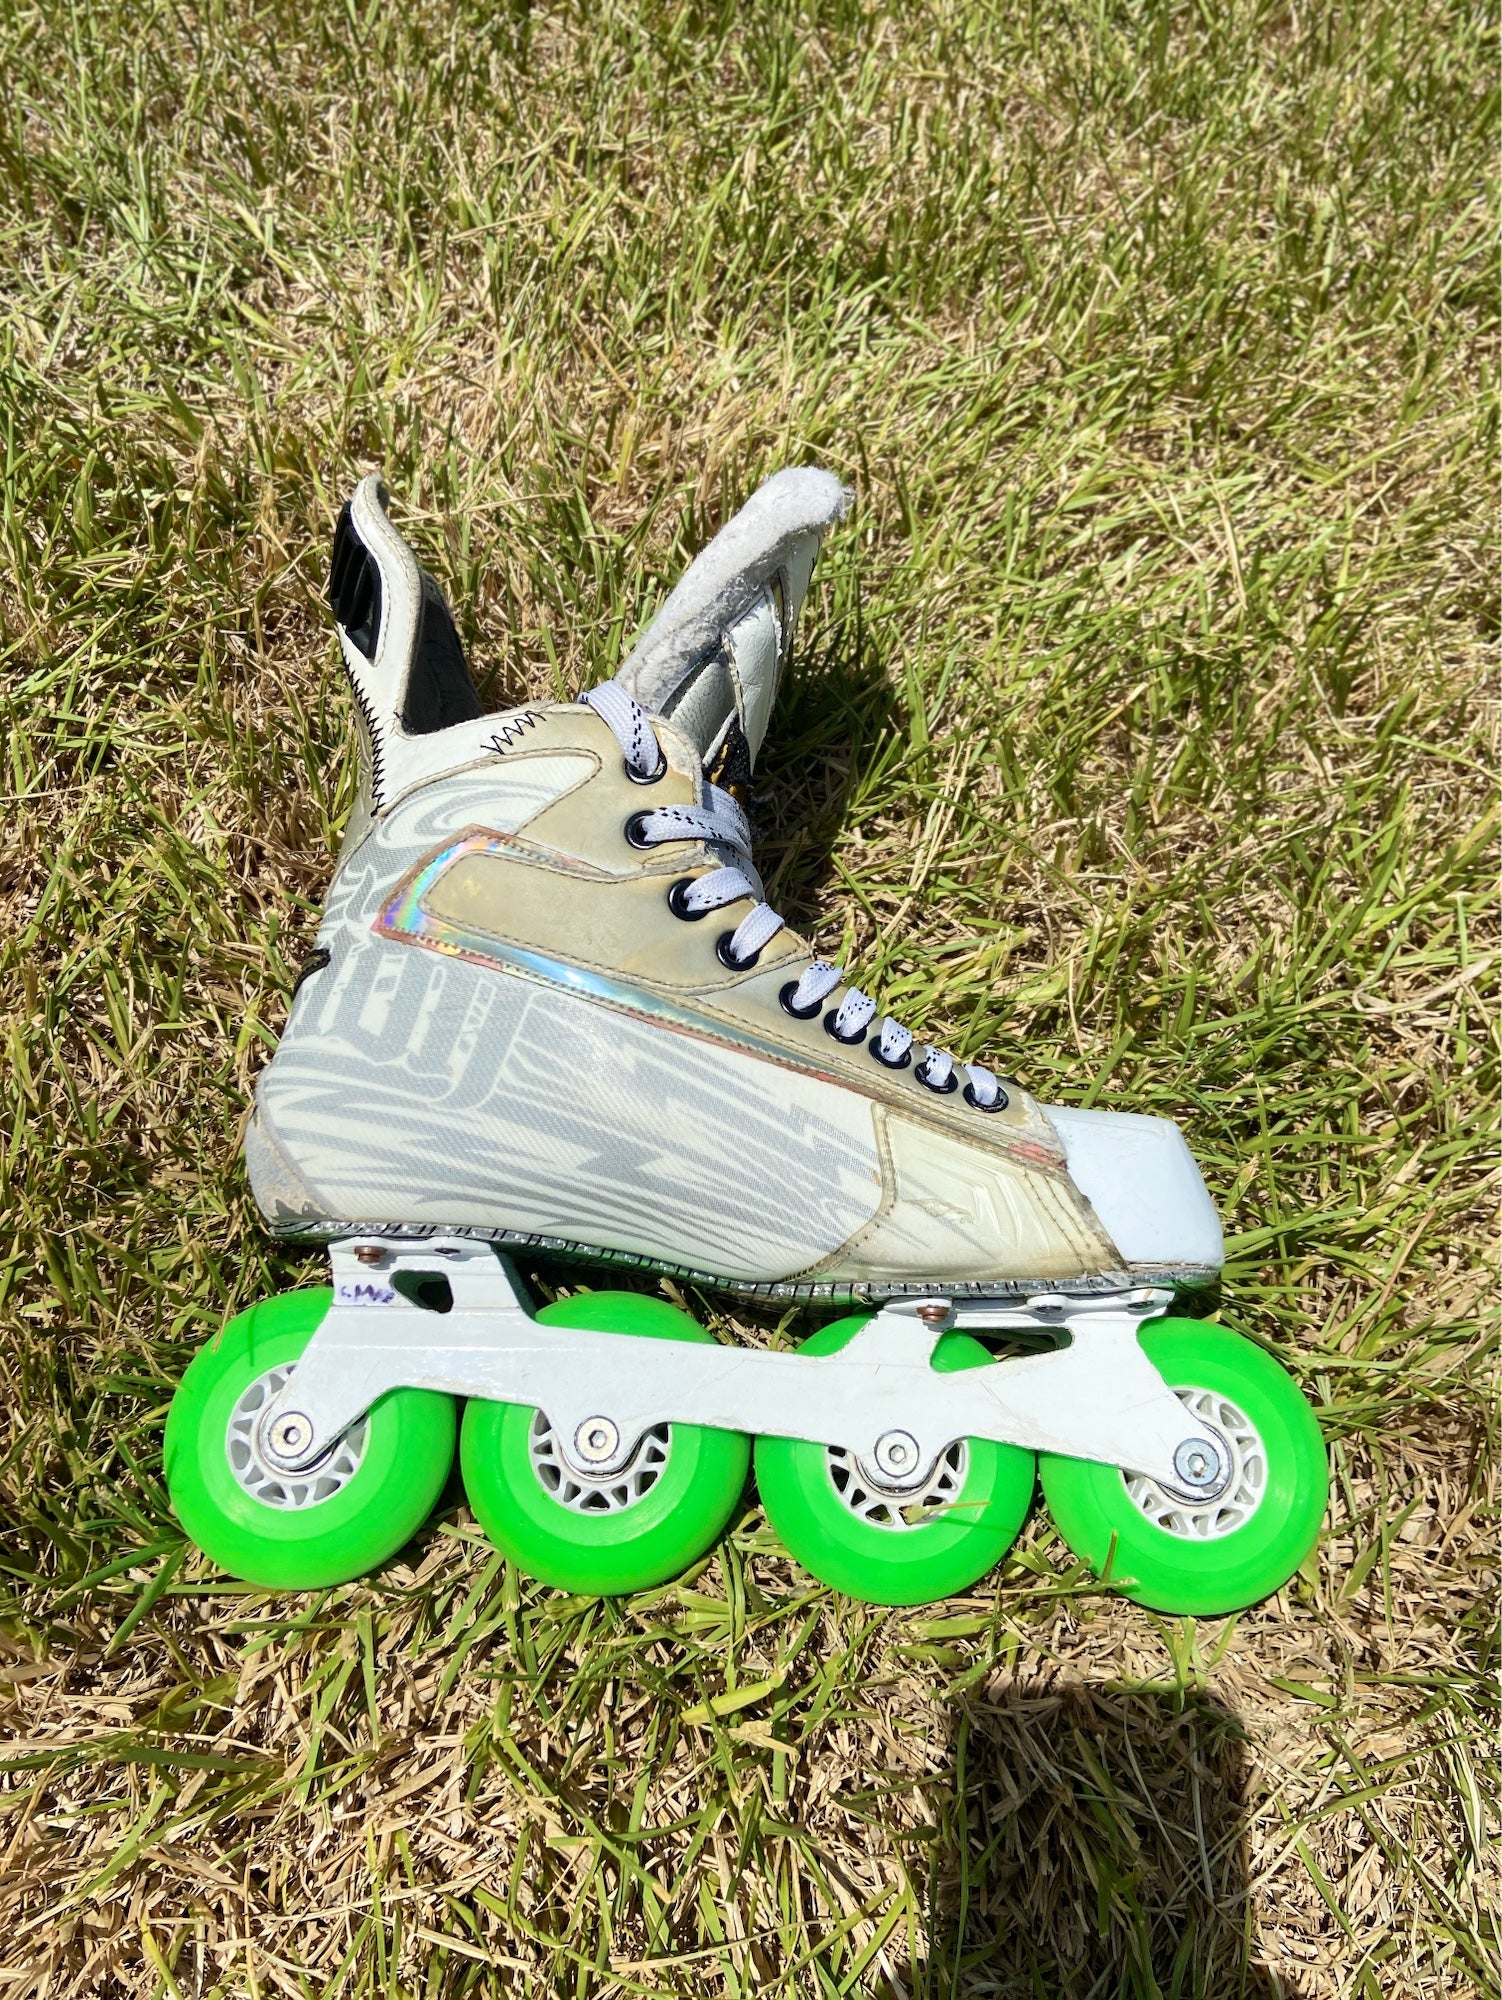 Details about   Mission Axiom Revolt T10 In-line Skates Size 11.5 RARE Highly sought after Top O 